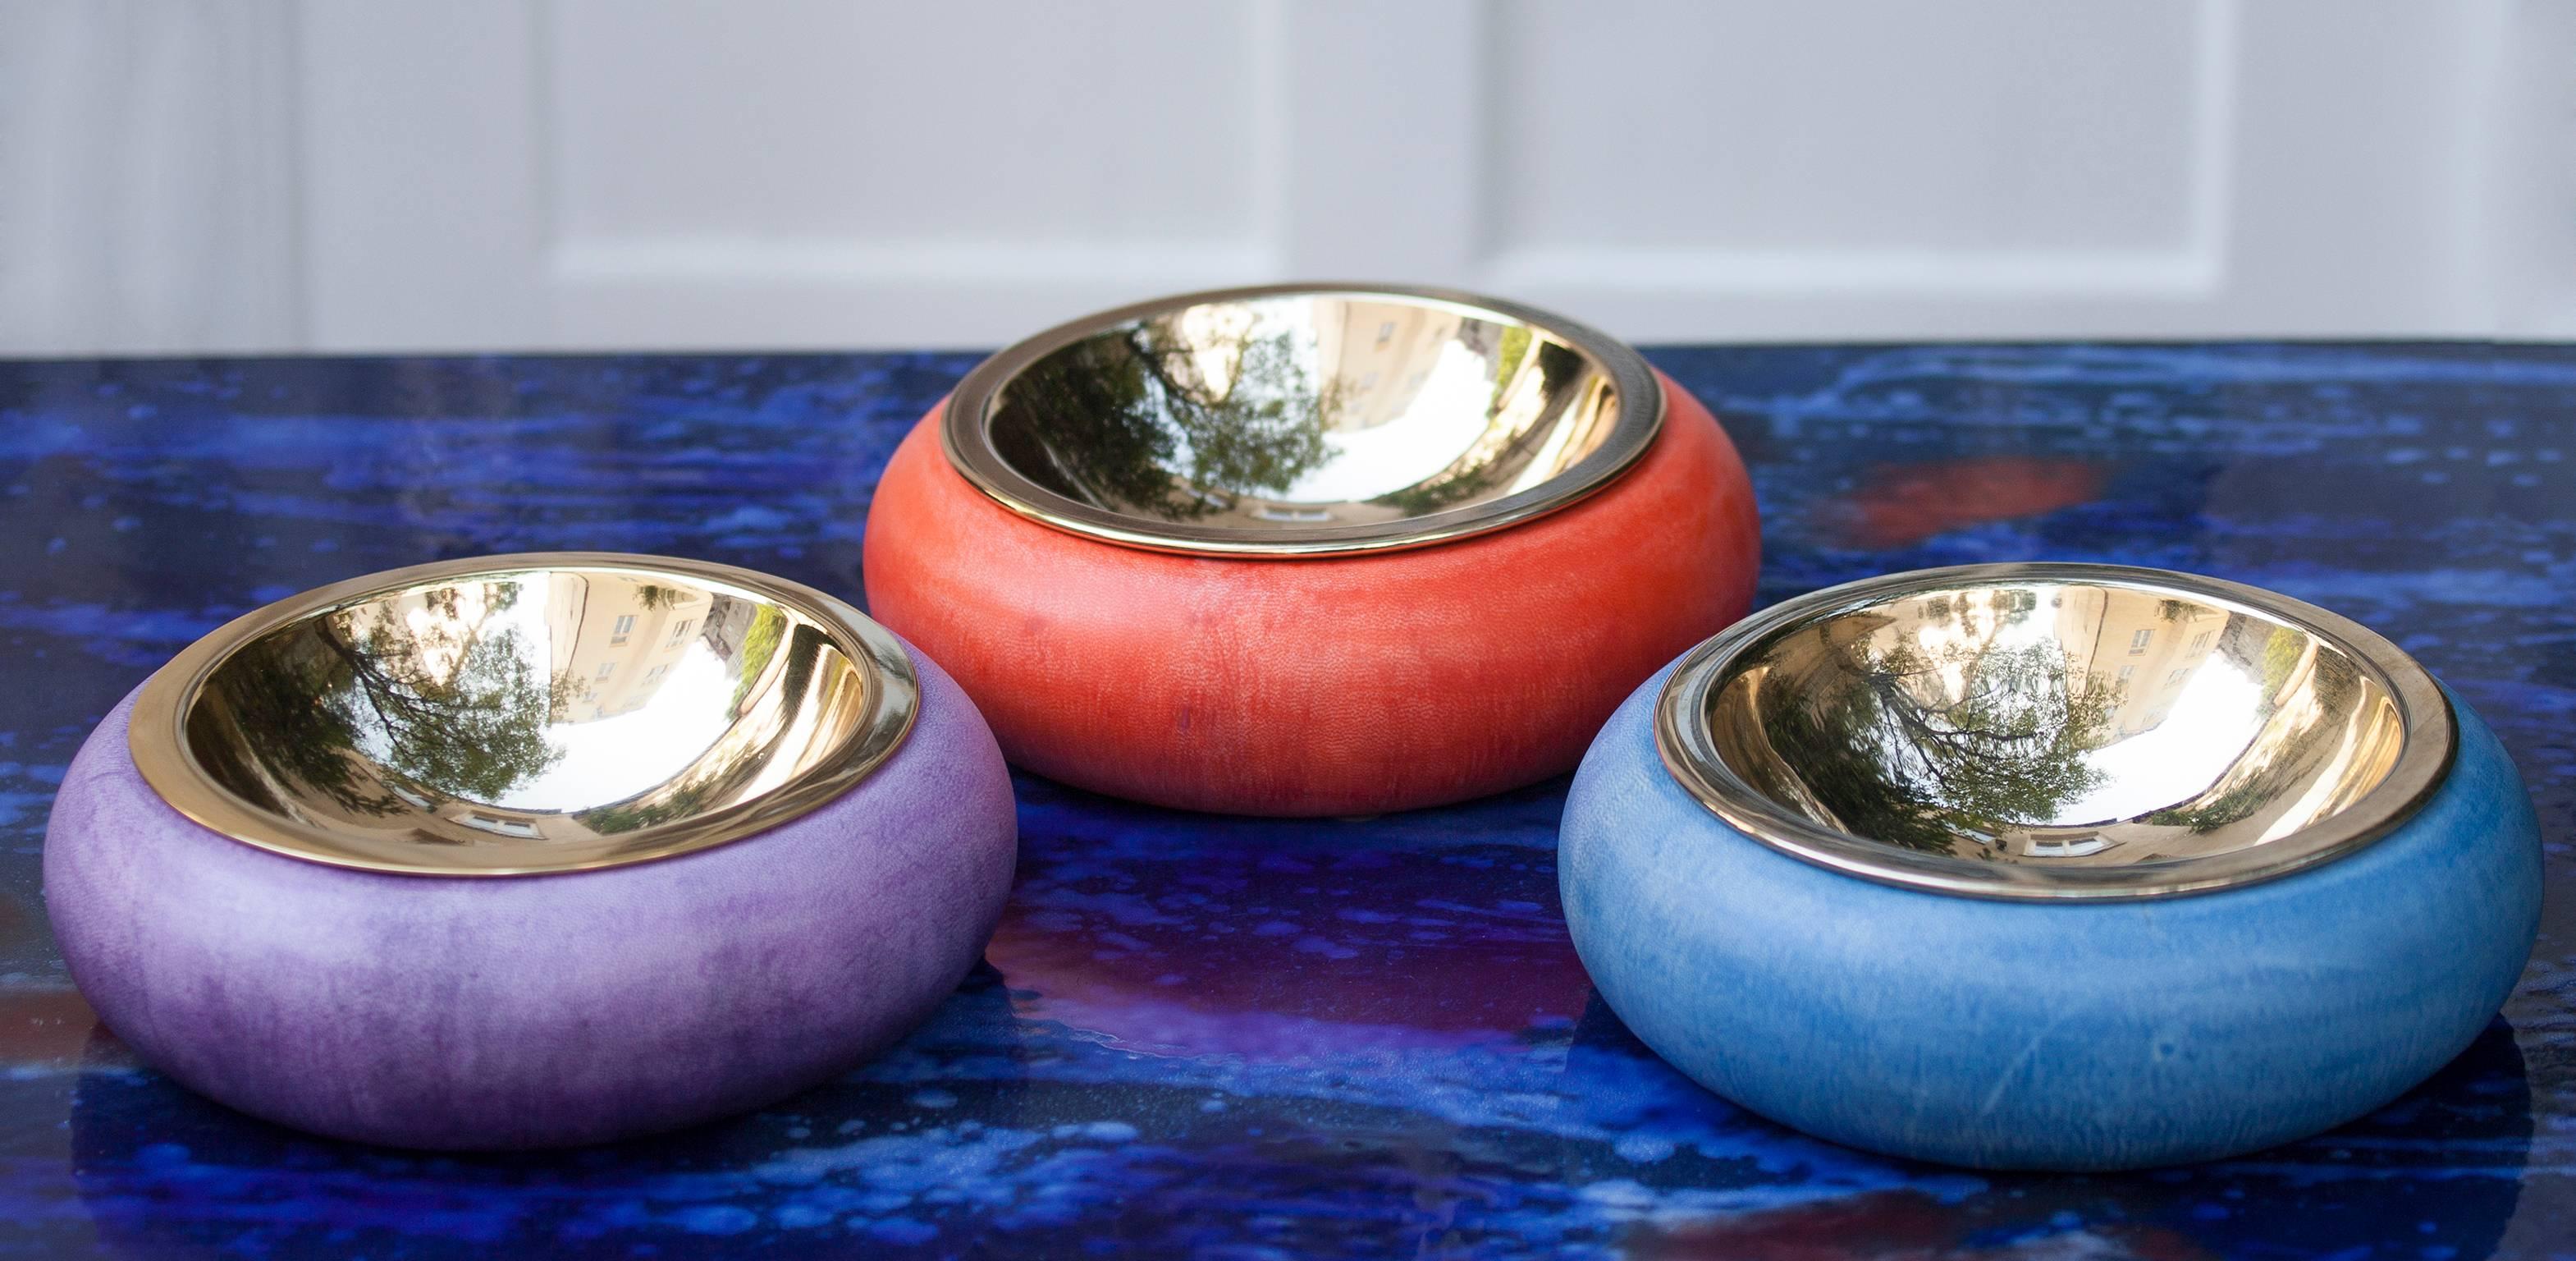 Wonderful bowls or ashtrays prototypes in colorful goatskin with brass inlays by Tura, Italy, 2015.

Measures: H 26 D 9 cm.